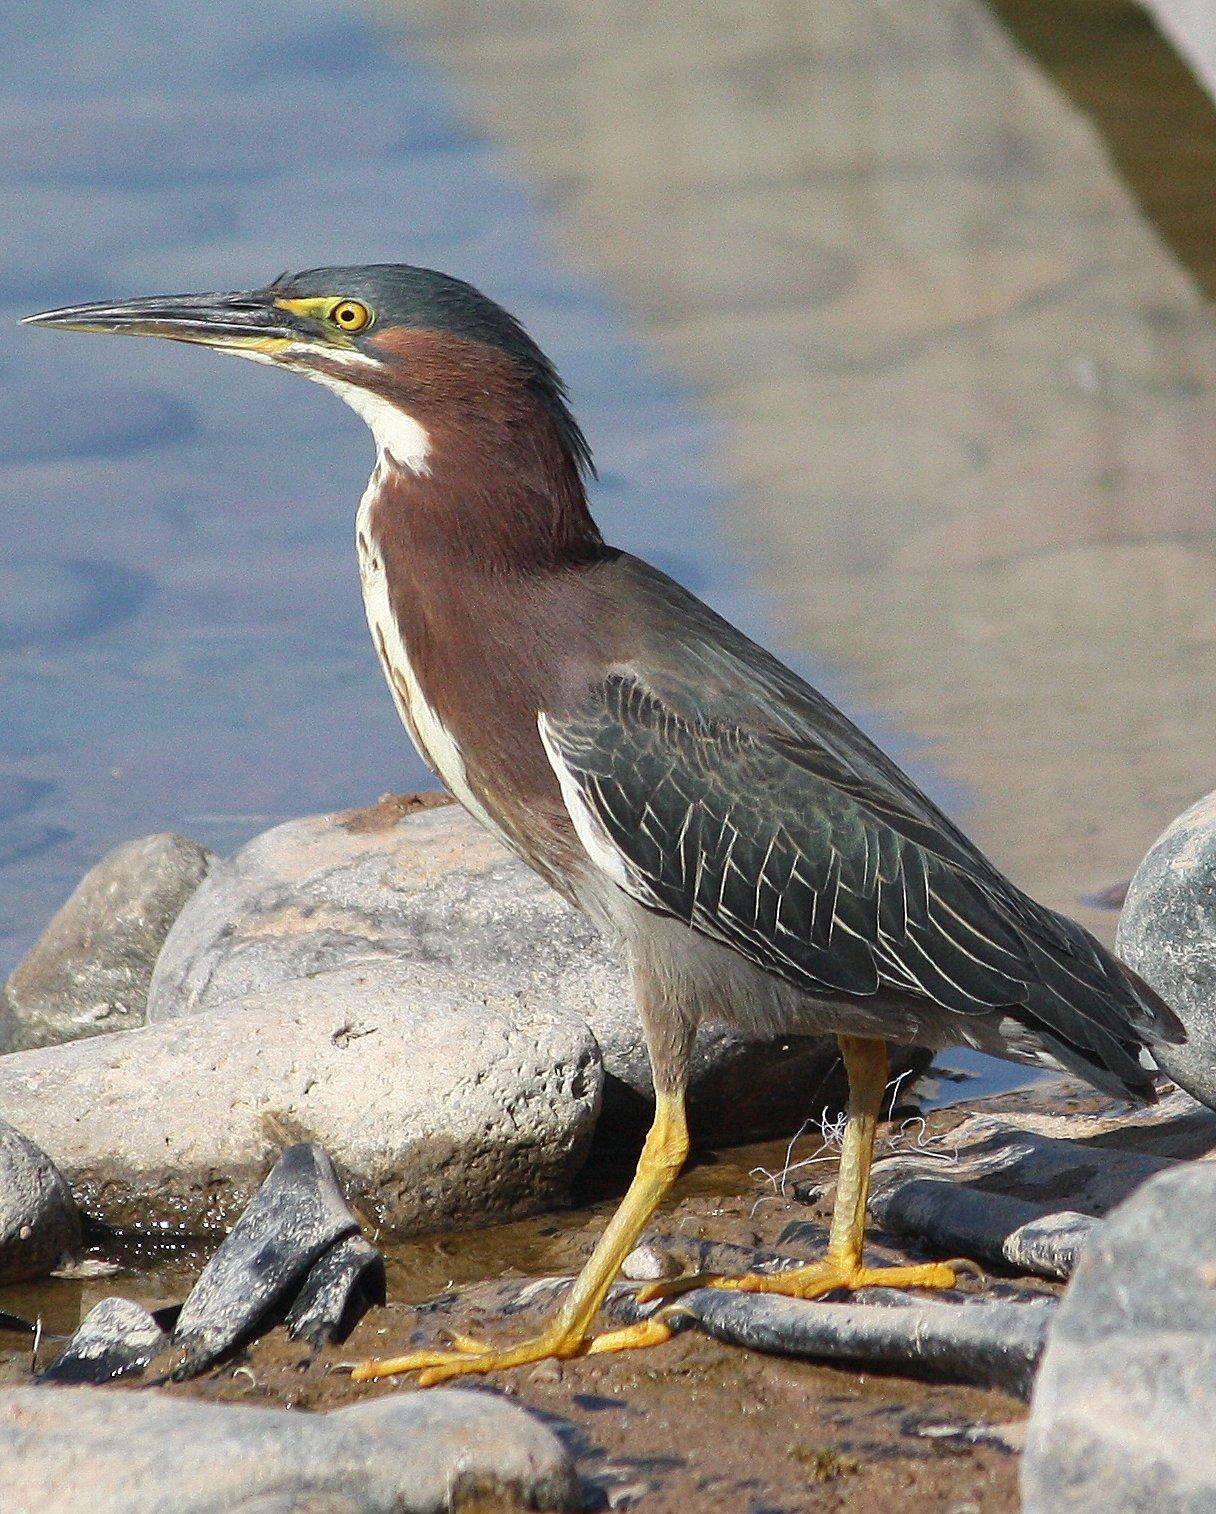 Green Heron Photo by Andrew Core